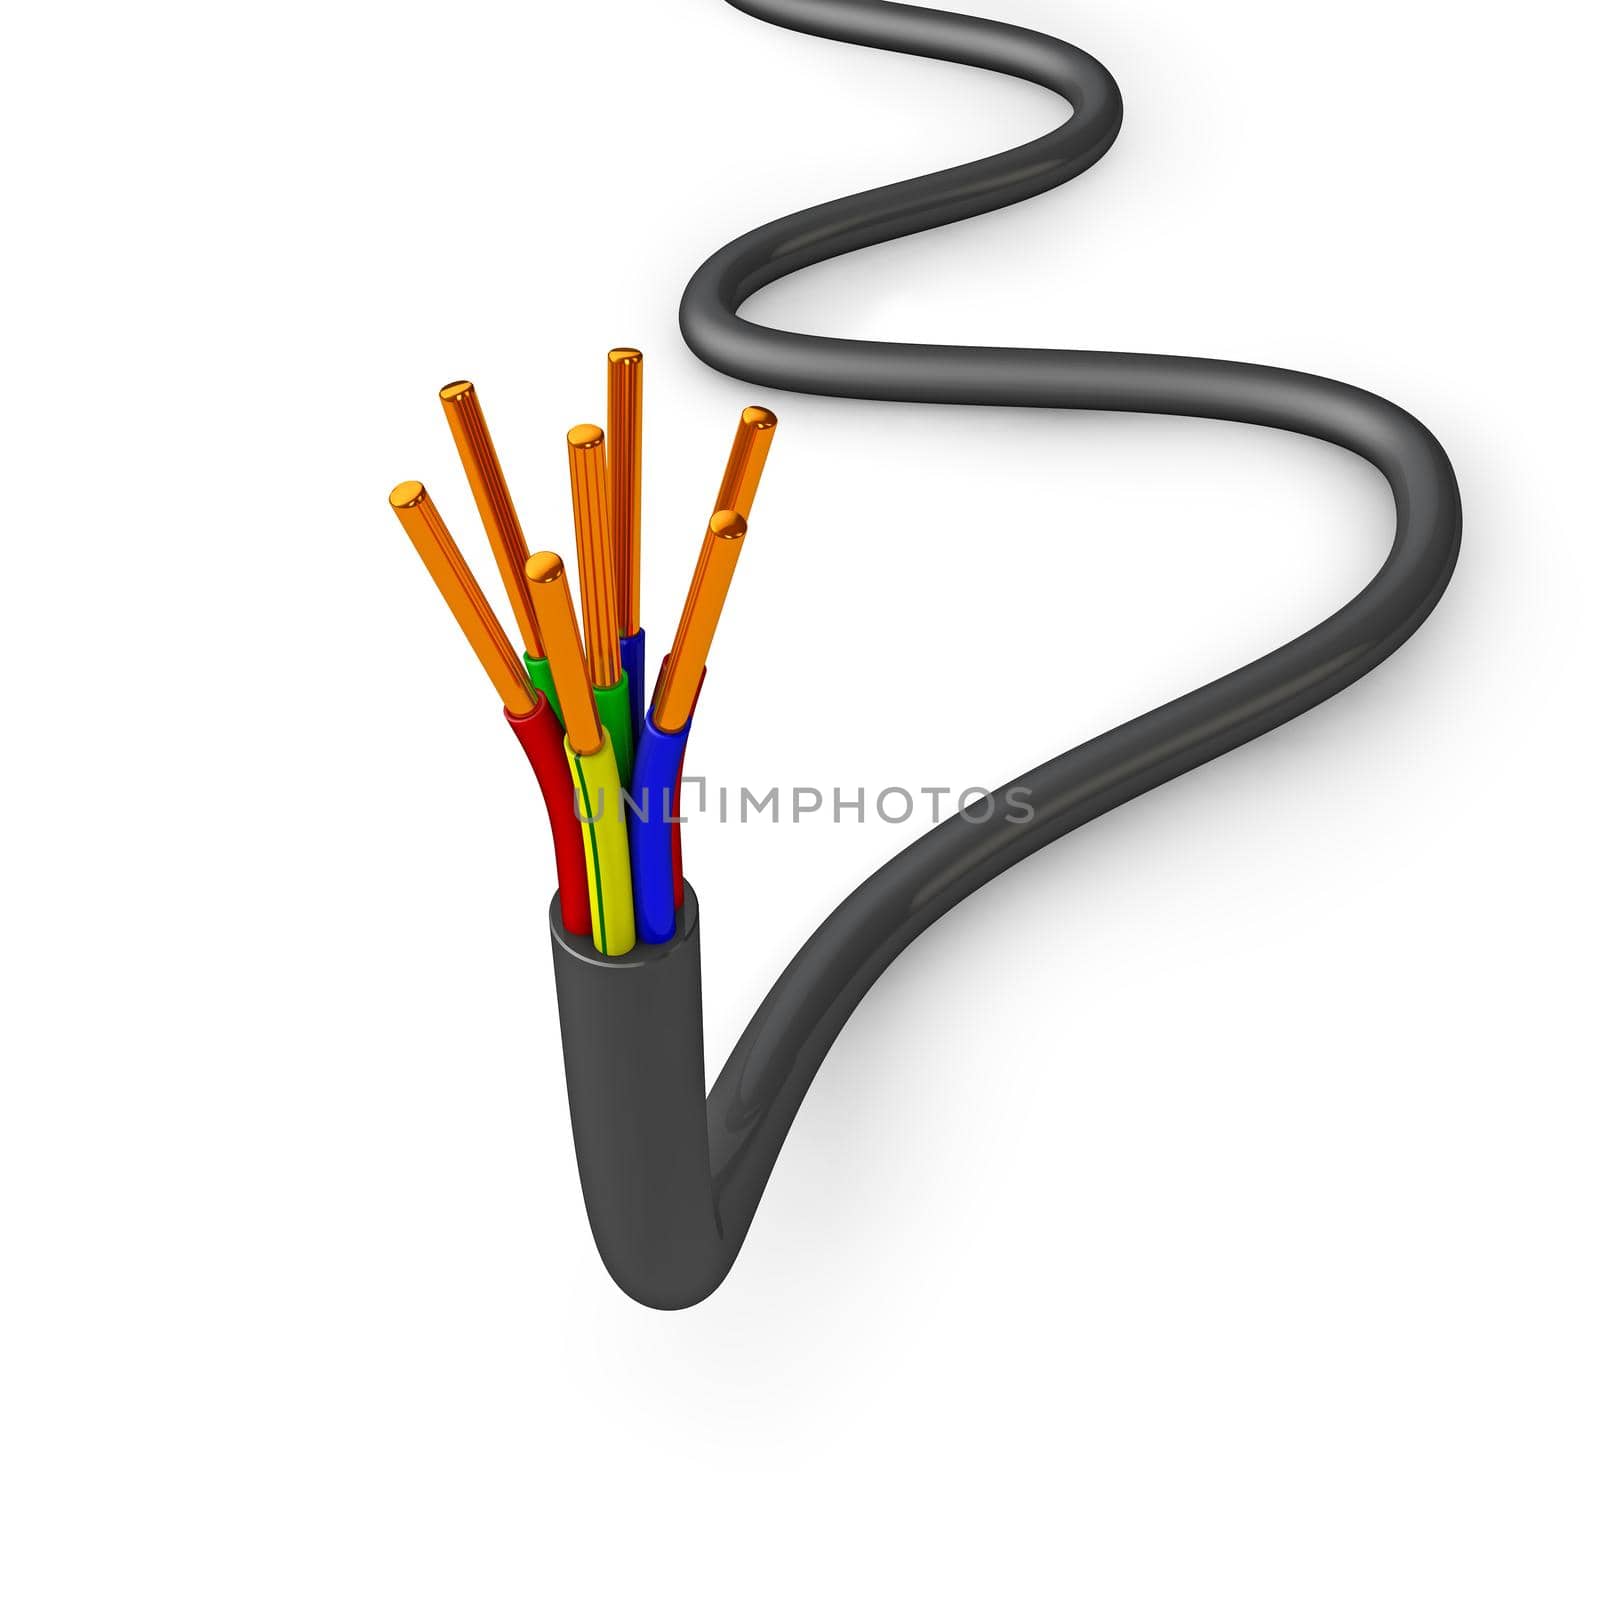 colorful copper electrical cable on white background